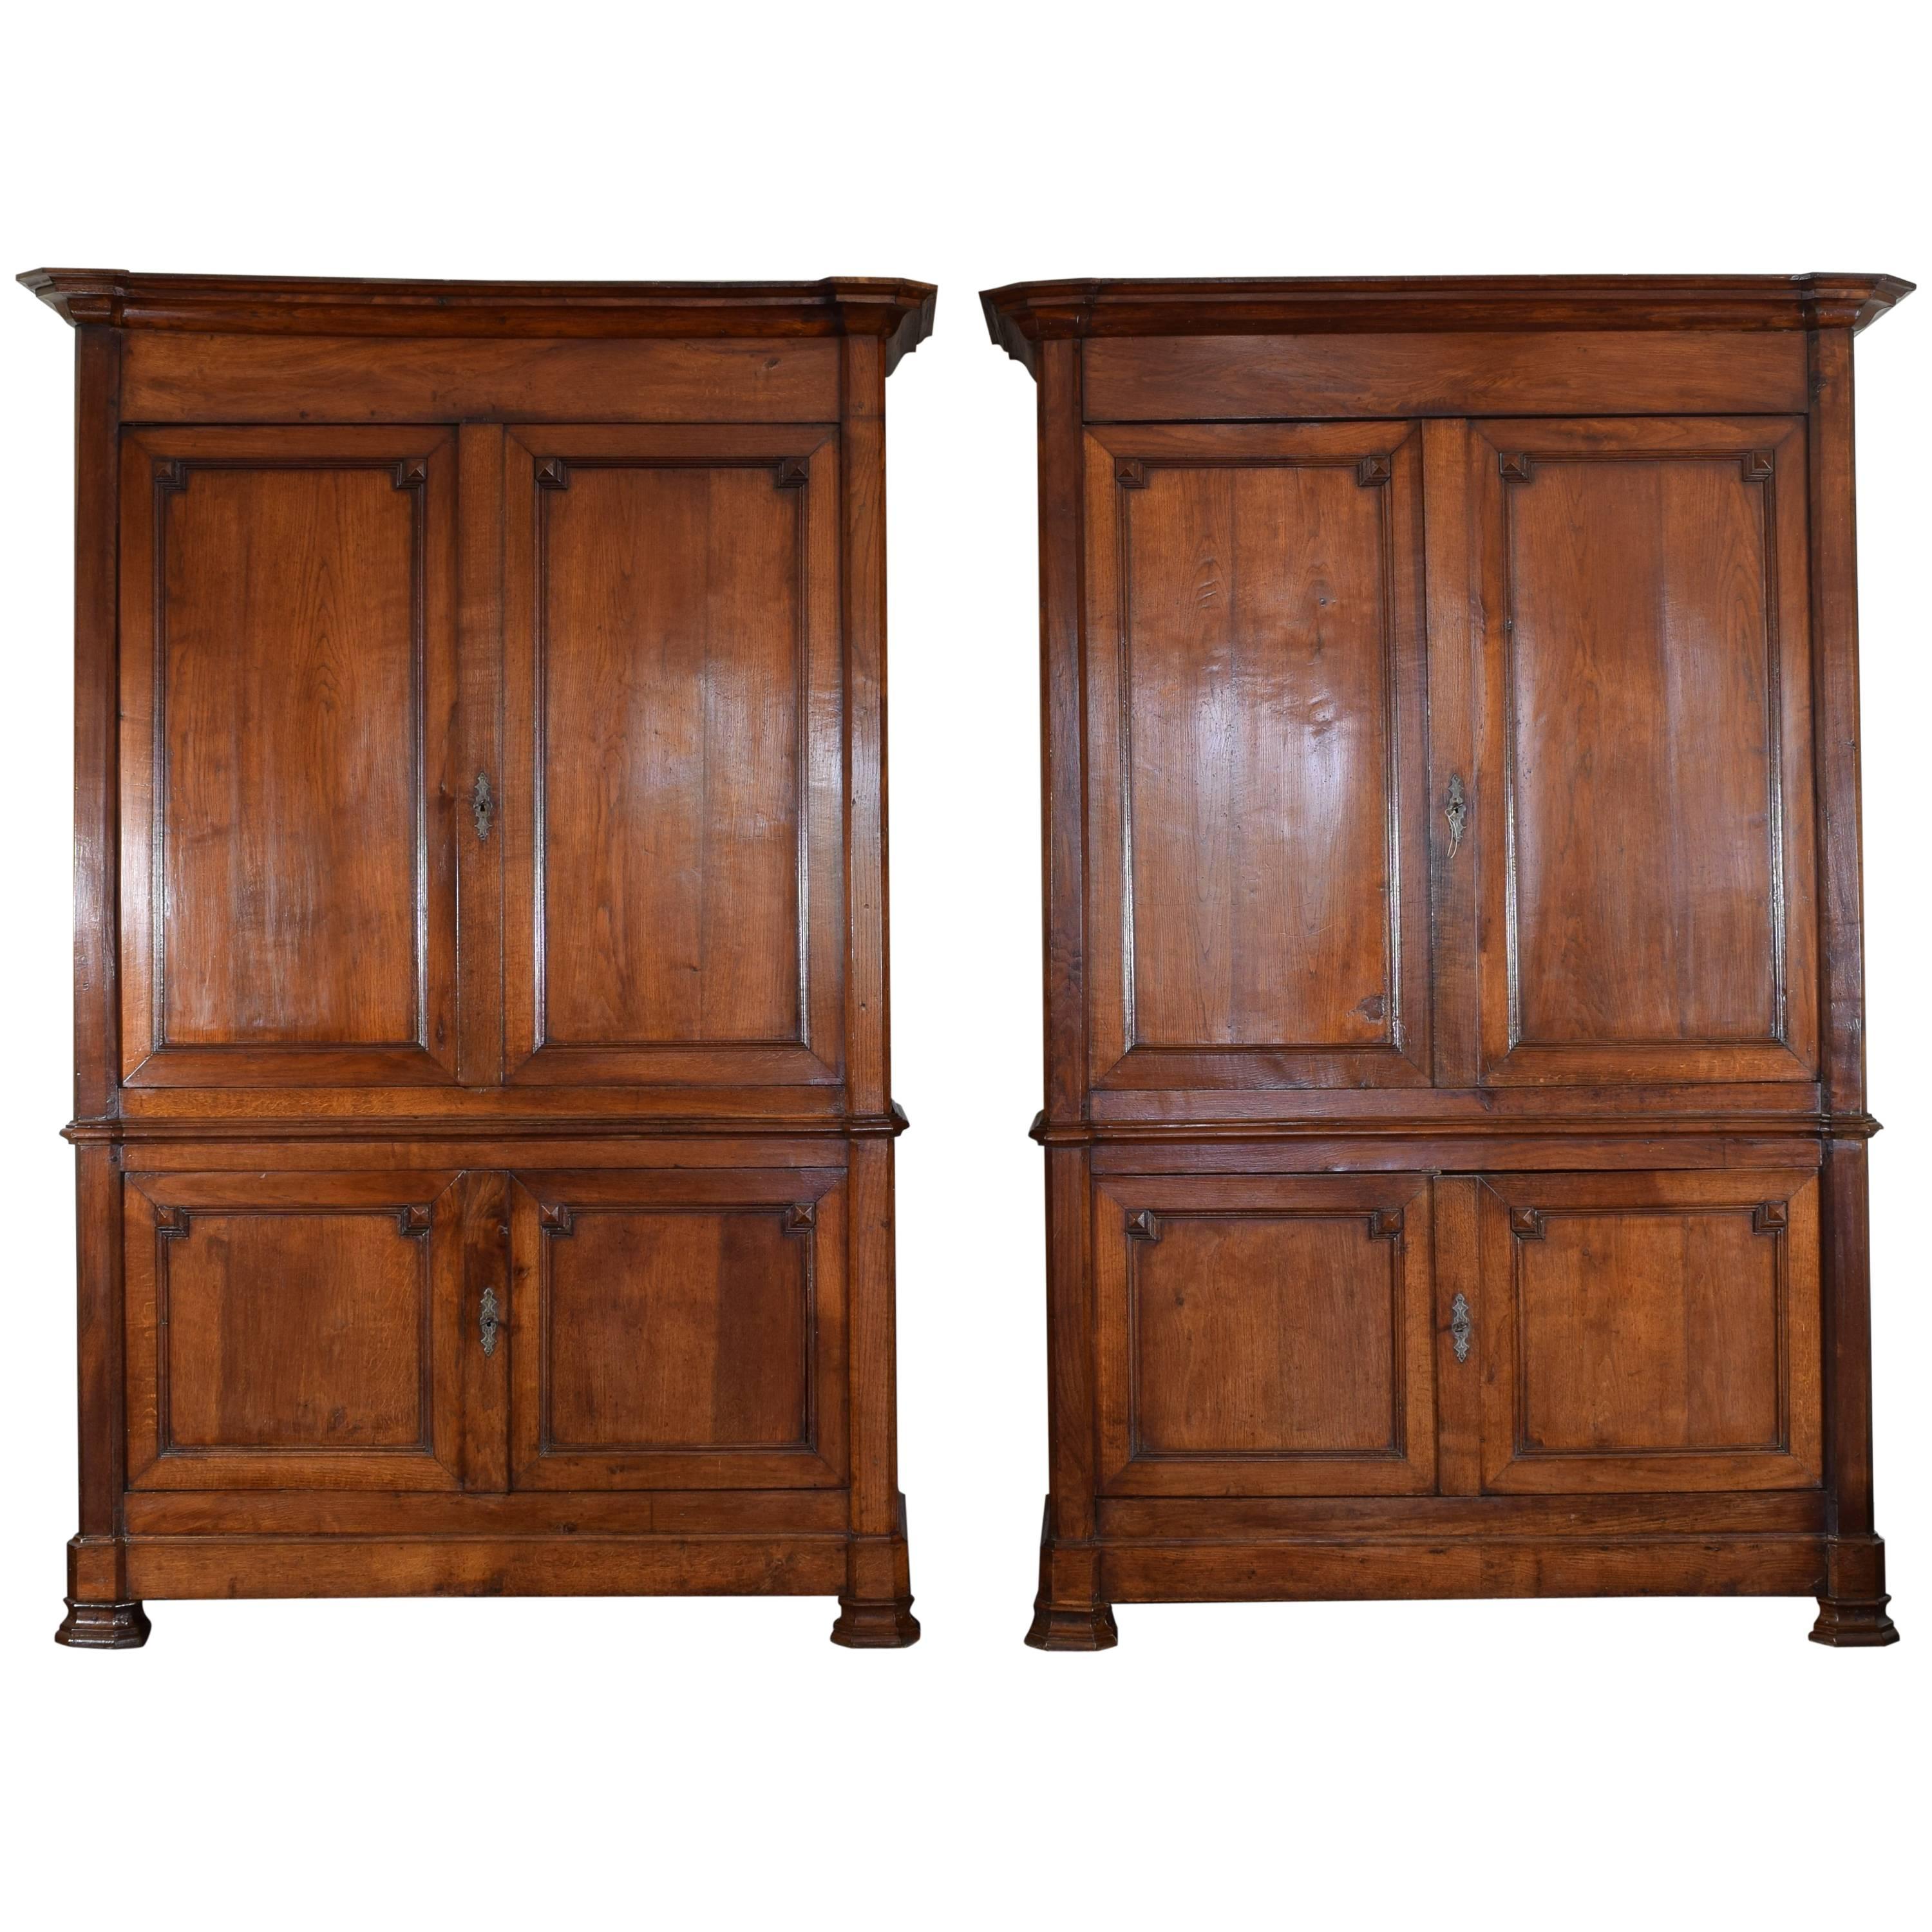 Pair of French Late Restauration Period Light Oak Four-Door Cabinets